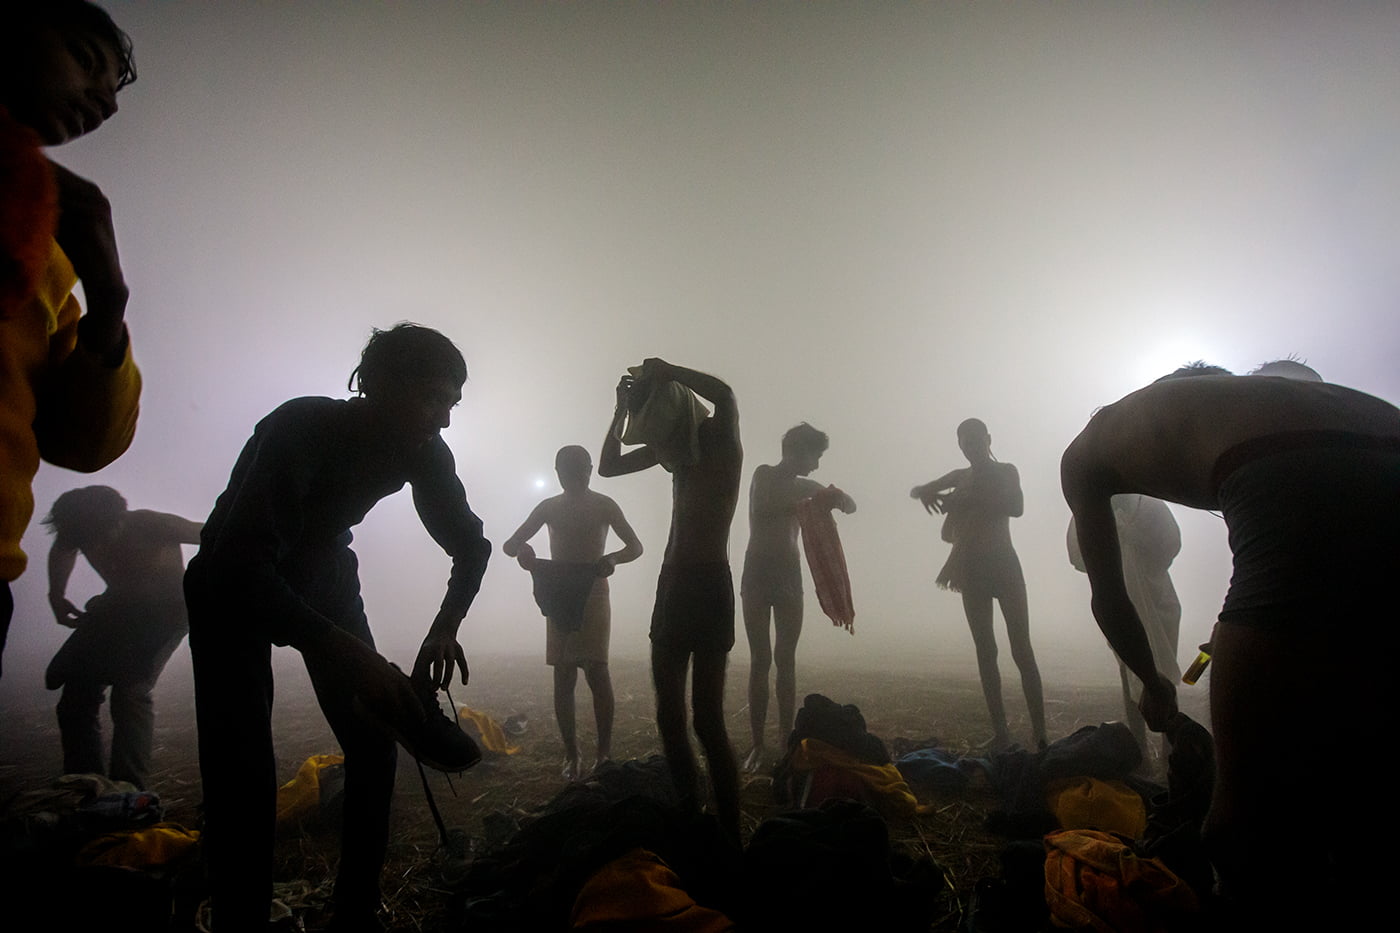 It was an early, foggy morning in the January 2019 Prayagraj Kumbh Mela. I guess the temperature was nearly 10° at that time, and the water was freezing cold. These are the young priests who are really enjoying dipping in the Ganges and playing around.